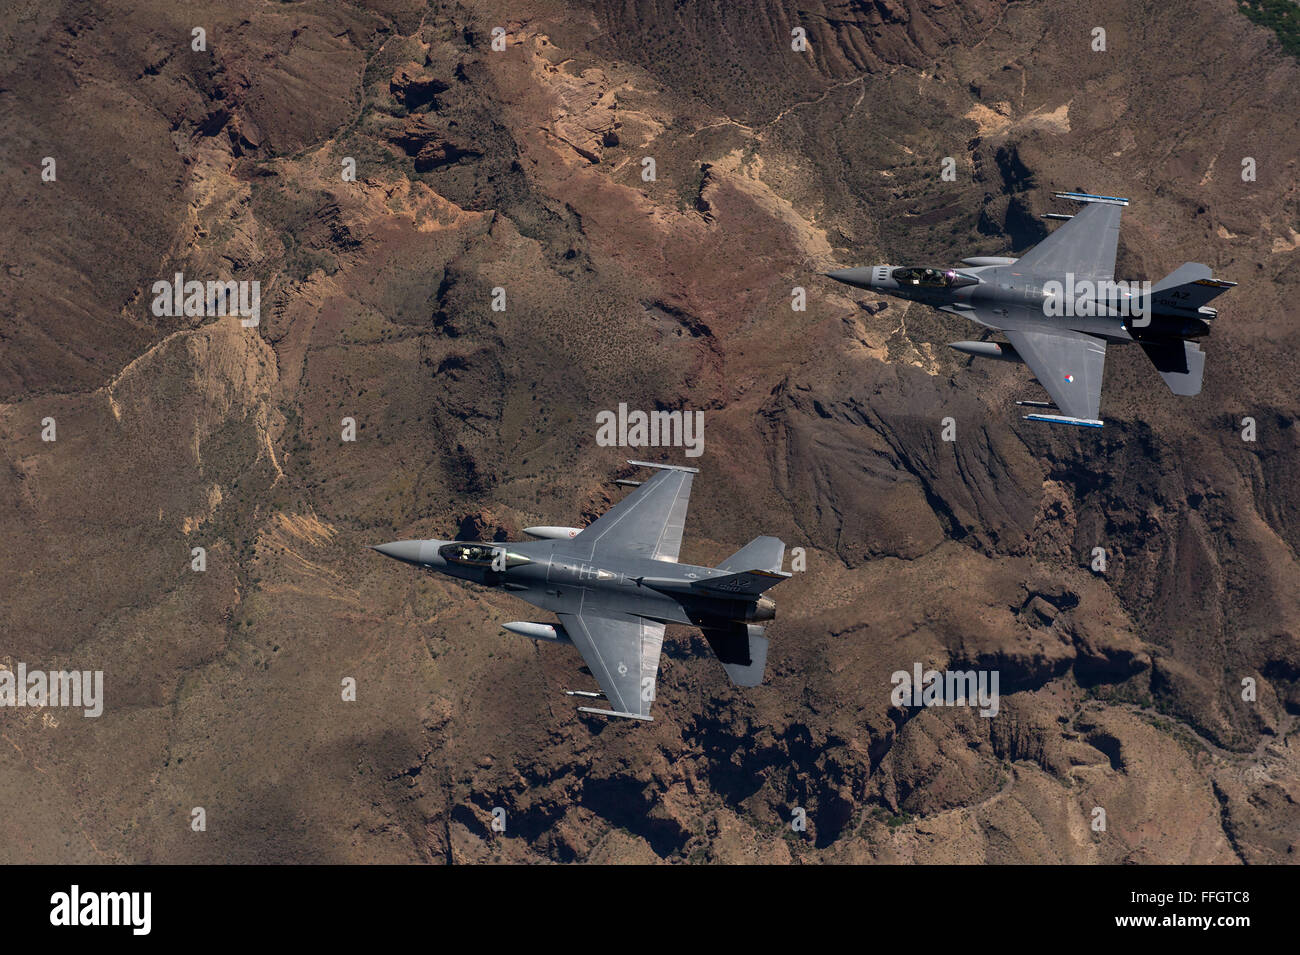 F-16 Fighting Falcons from the 162nd Wing, Tucson, Arizona fly over an training range on April 8, 2015. The 161st Wing manages a fleet of more than 70 F-16 C/D and Mid-Life Update Fighting Falcons. There are three flying squadrons and numerous maintenance units assigned to the wing. Stock Photo